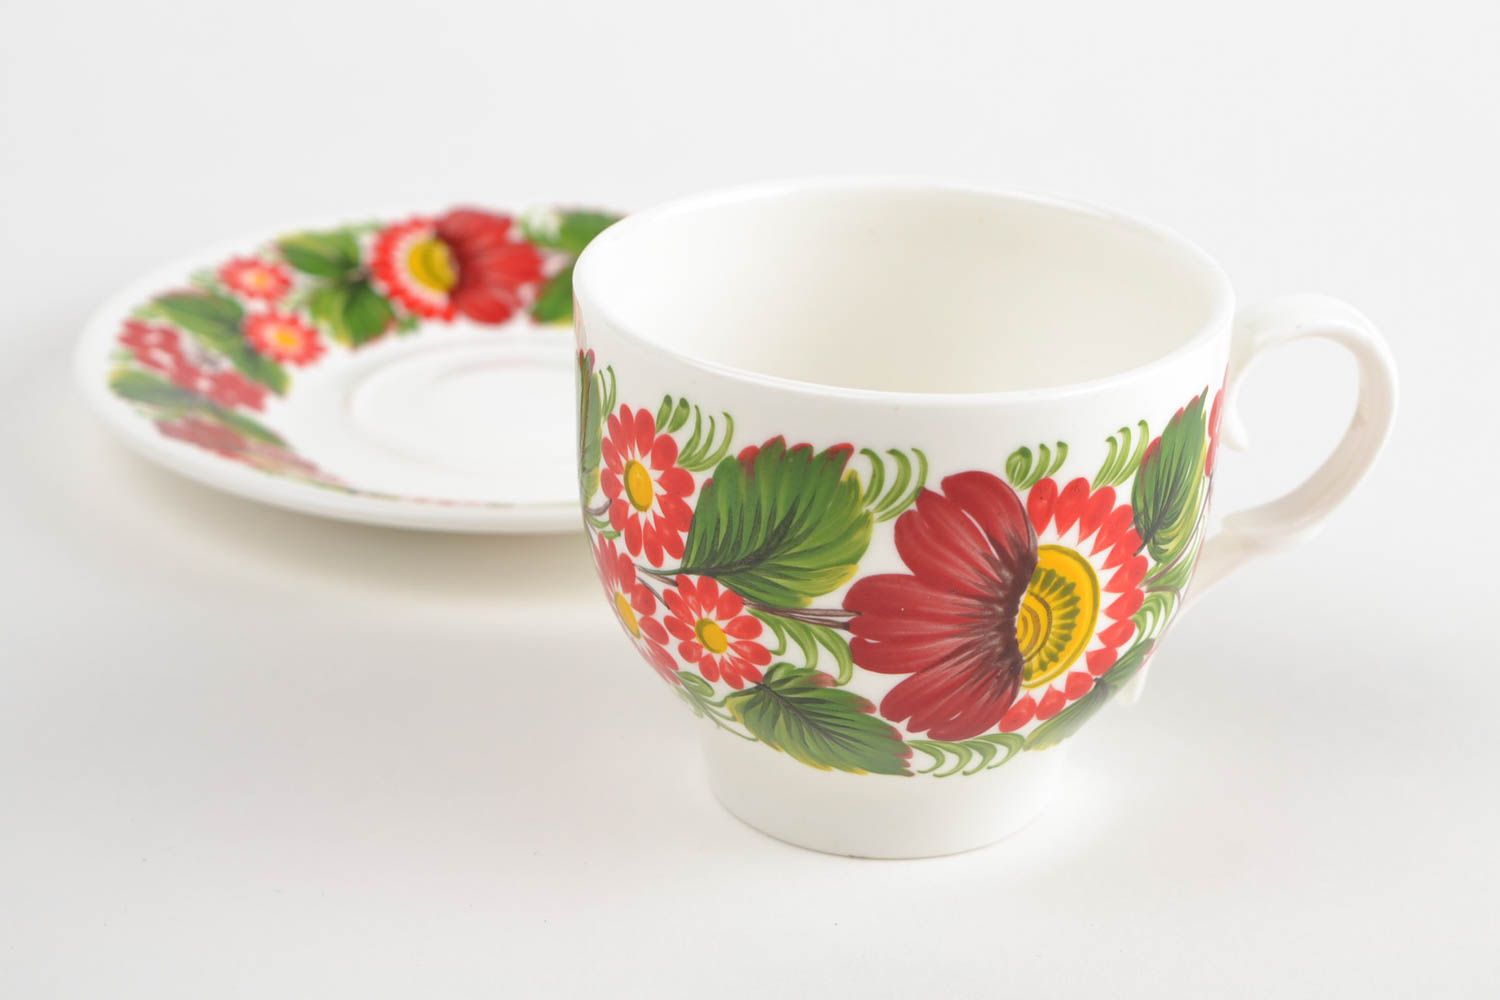 8 oz white porcelain teacup in bright floral red and green colors with handle and saucer photo 3